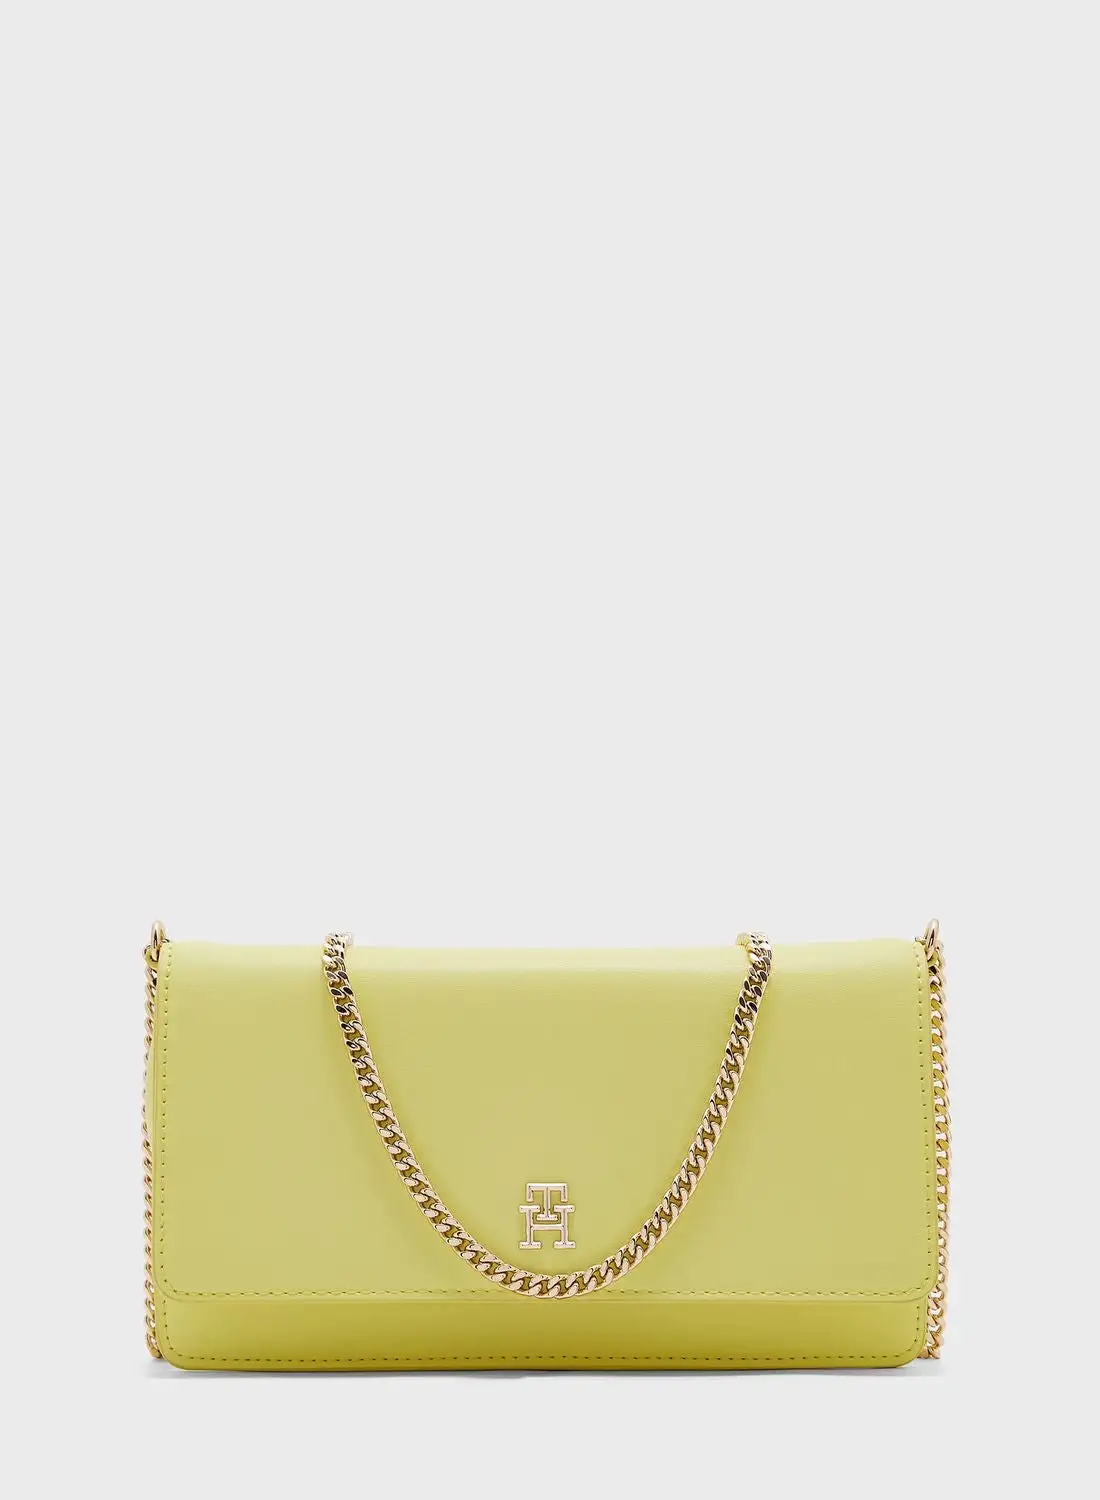 TOMMY HILFIGER Refined Chain Crossbody